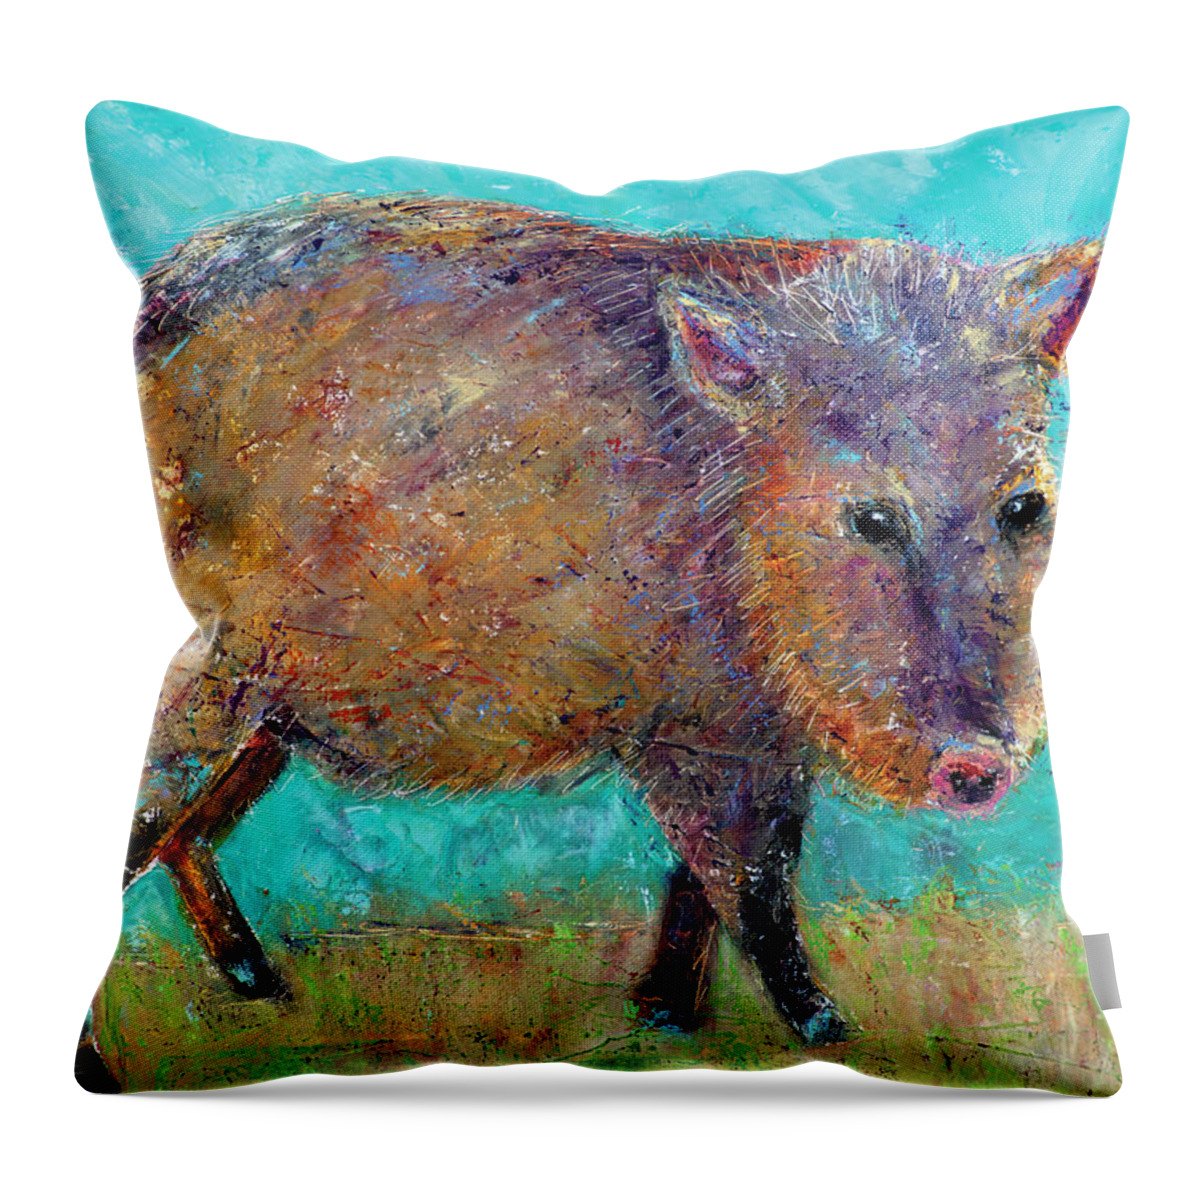 Colorful Throw Pillow featuring the painting Lena by Brenda Peo